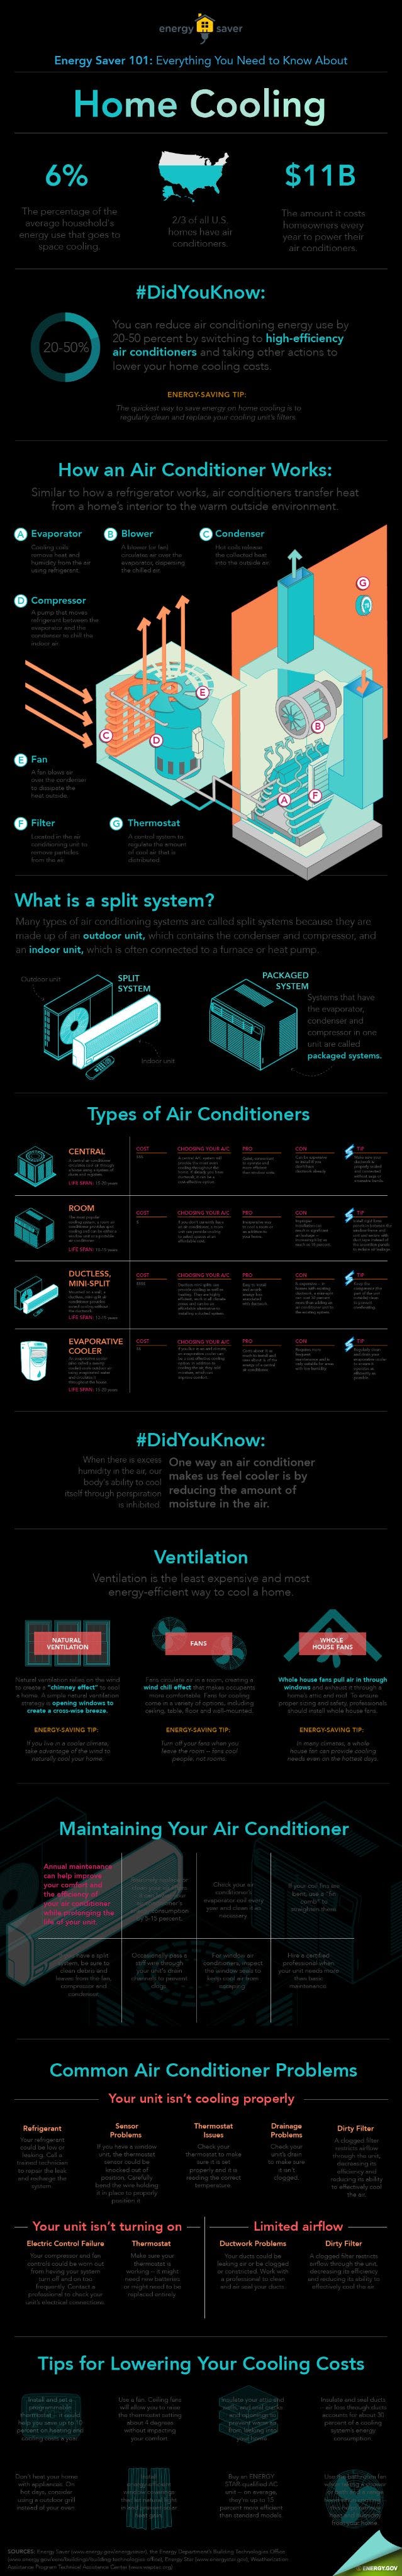 home cooling infographic.png